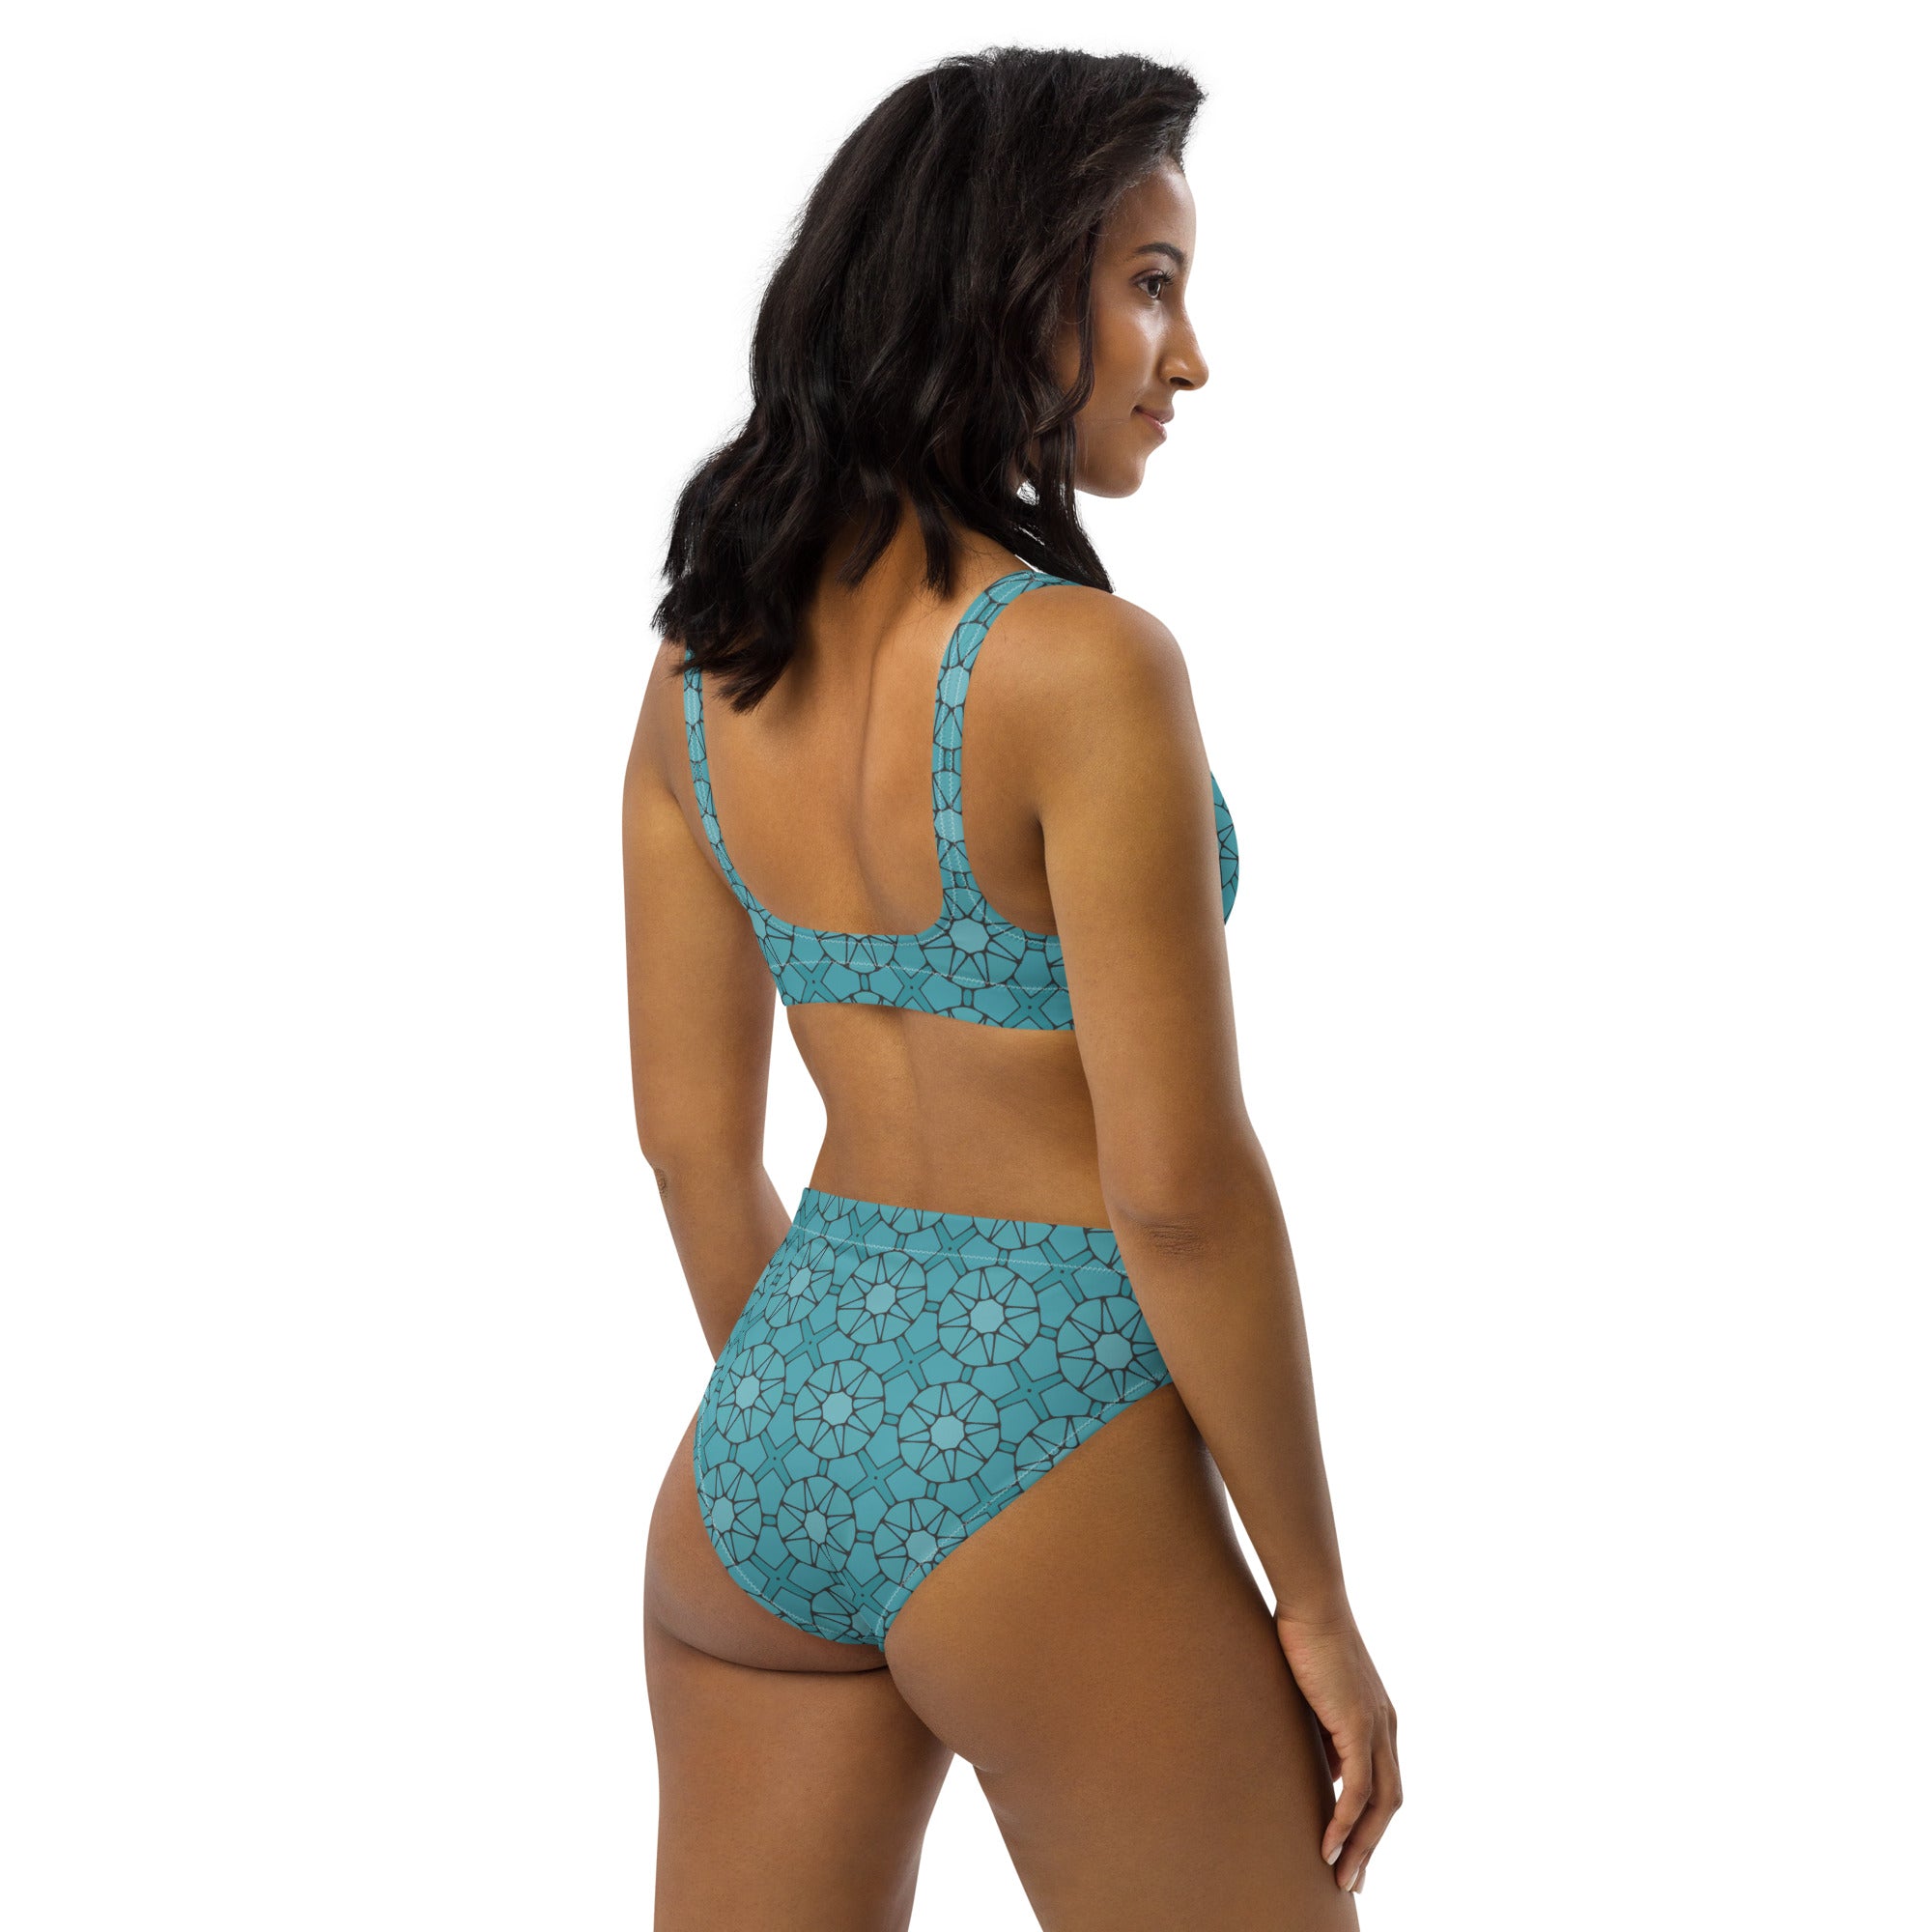 Green starry patterned Recycled high-waisted bikini, by Sensus Studio Design